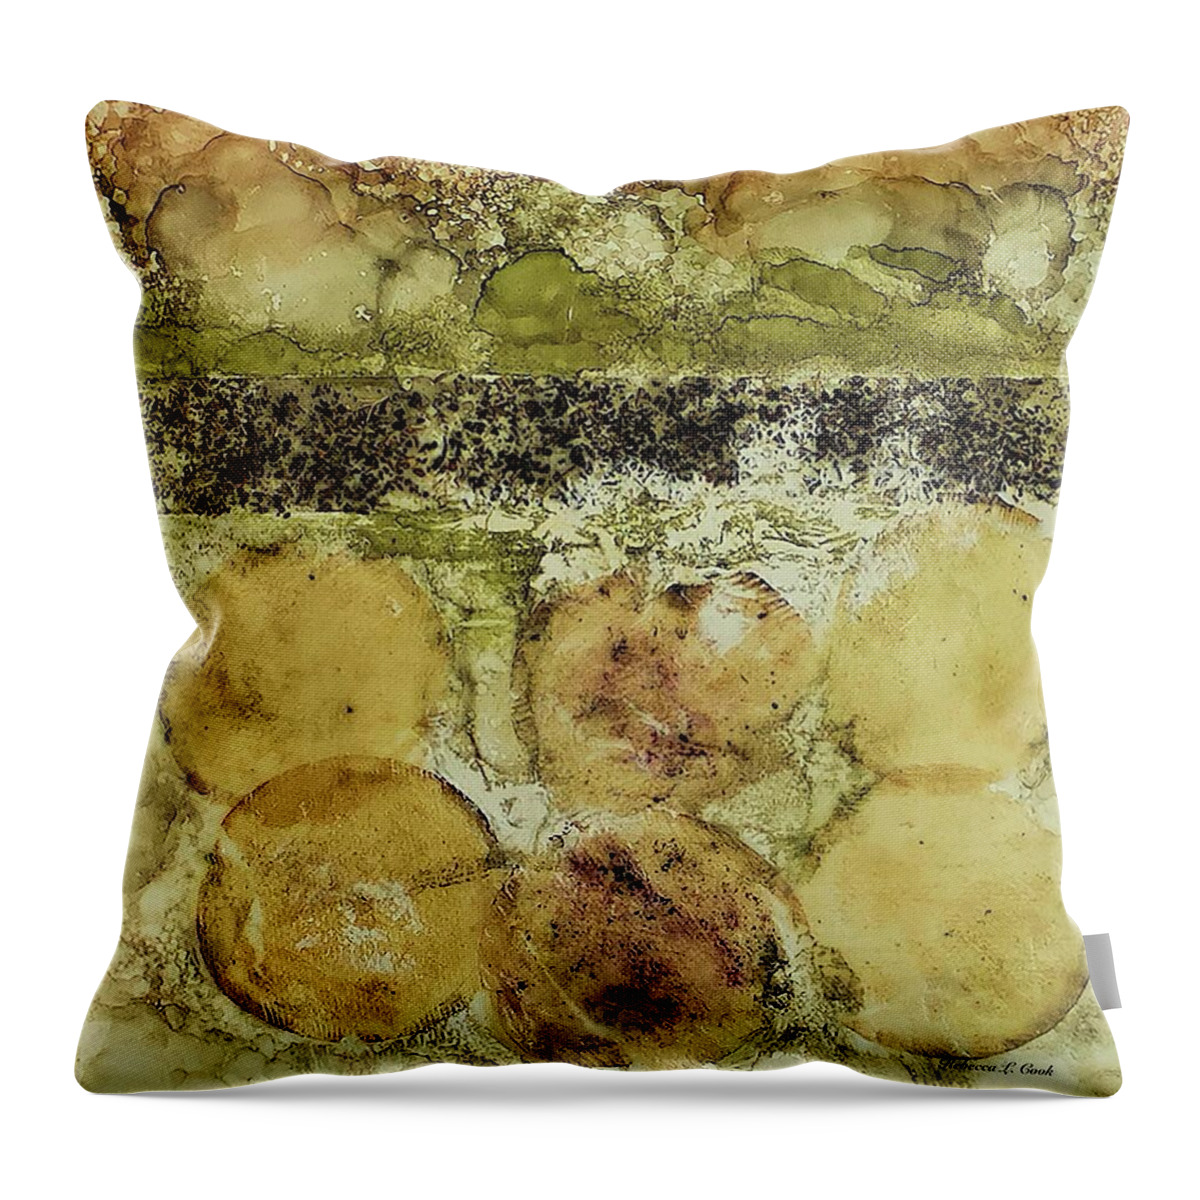 Breezes Blow Throw Pillow featuring the painting Breezes Blow by Bellesouth Studio